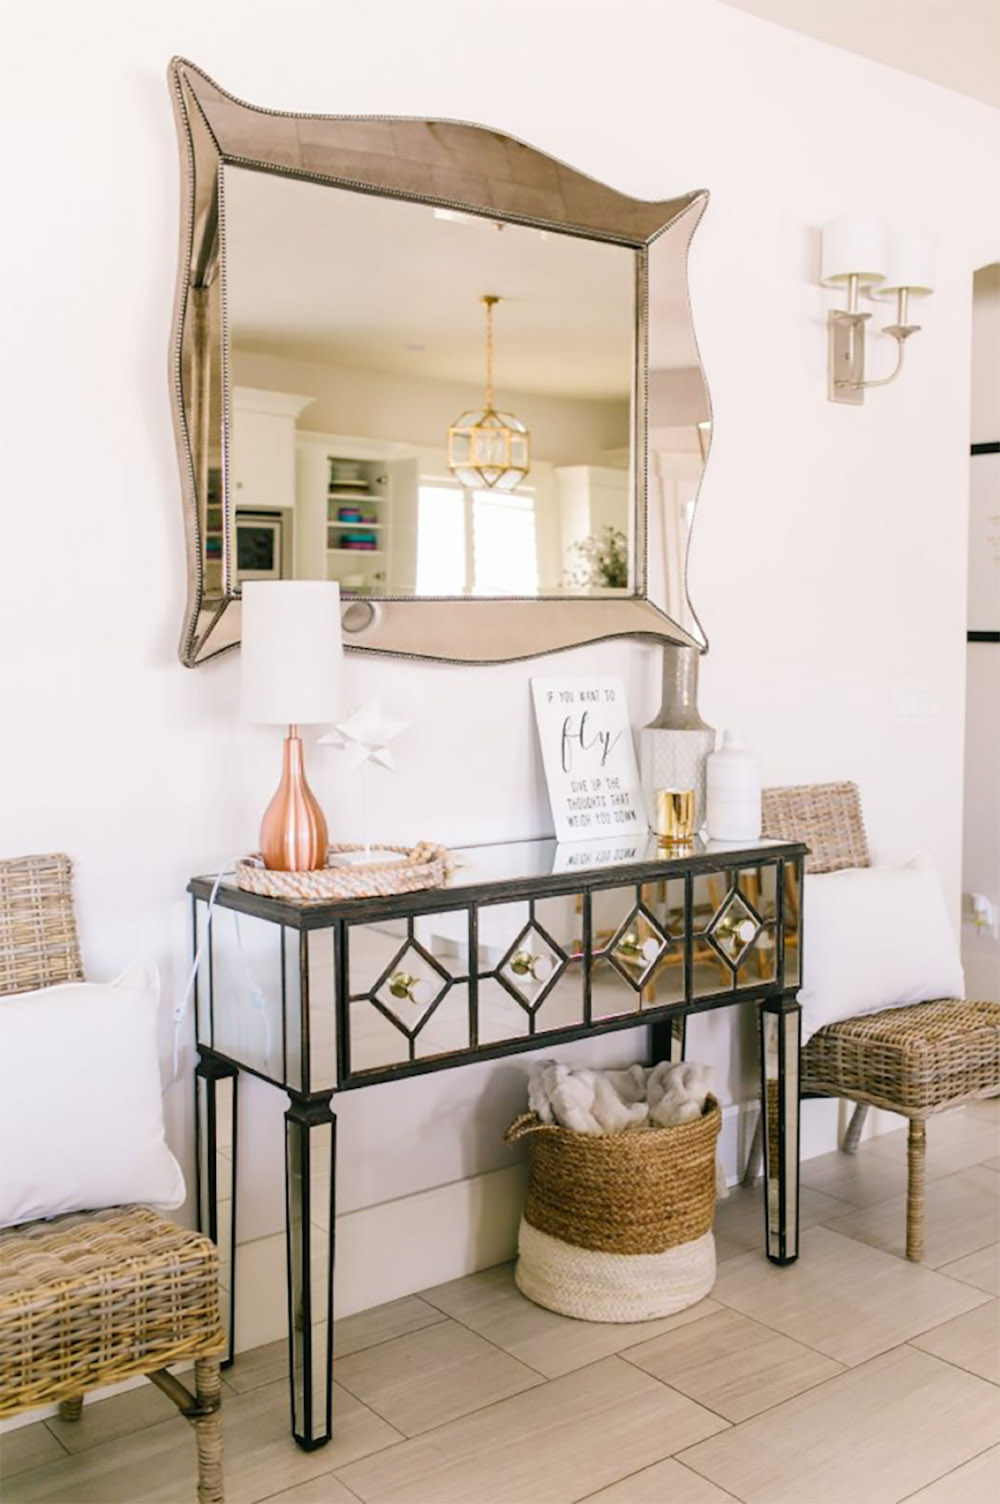 A dining room decorated with a mirrored console, accent chairs, and wall sconces.